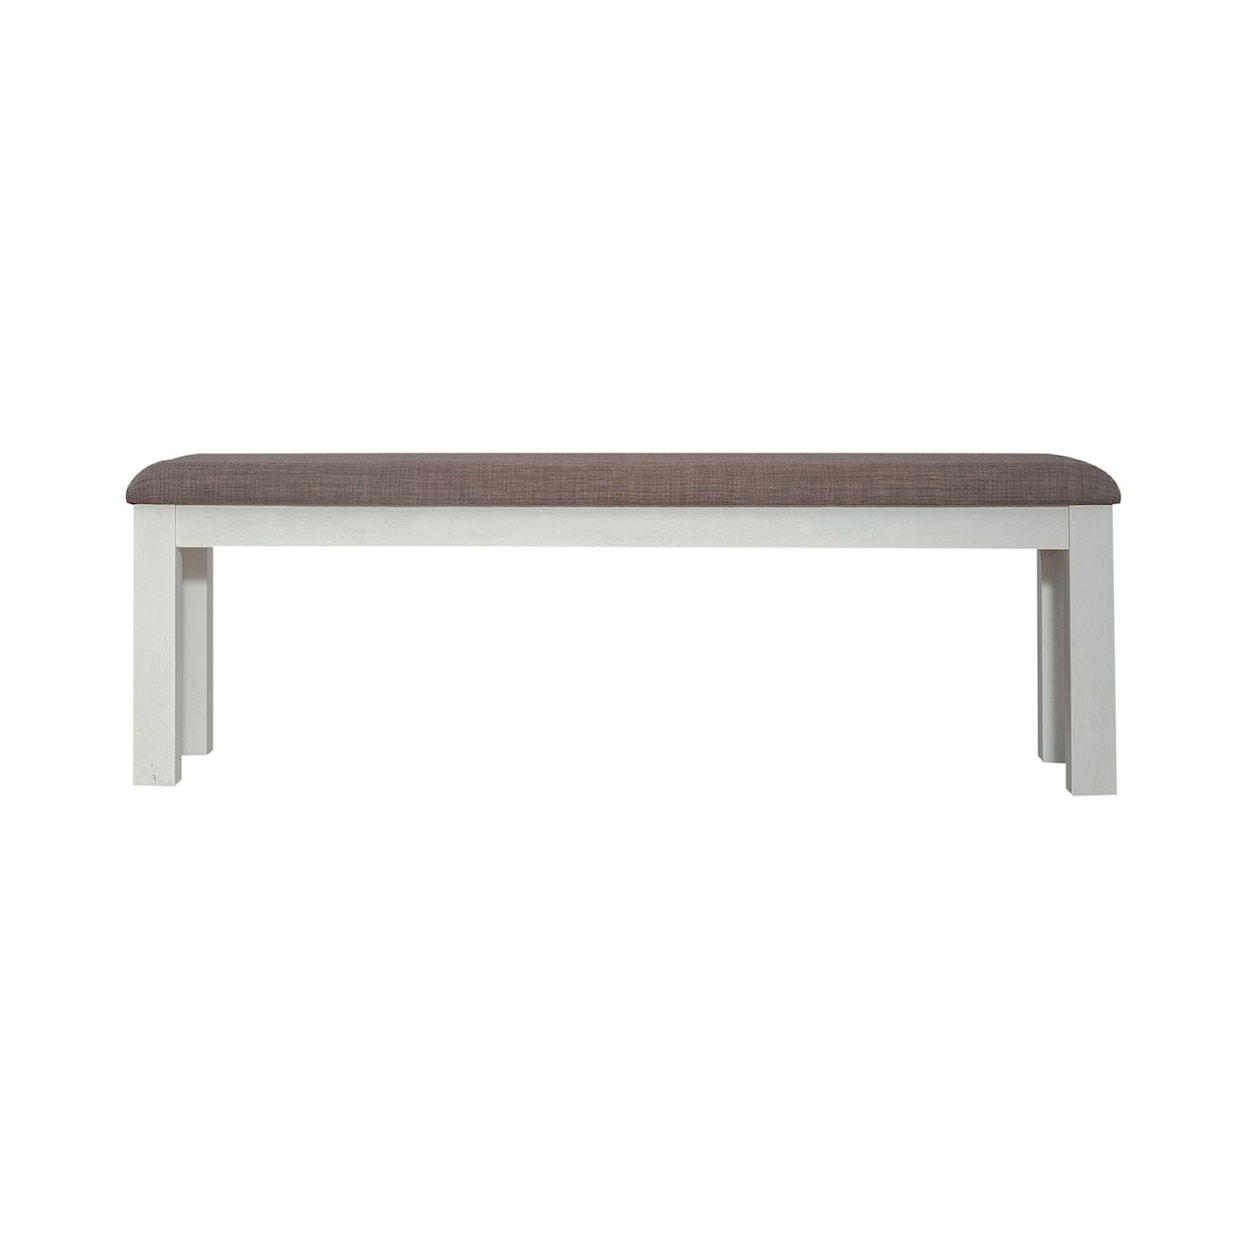 Liberty Furniture Brook Bay Upholstered Dining Bench